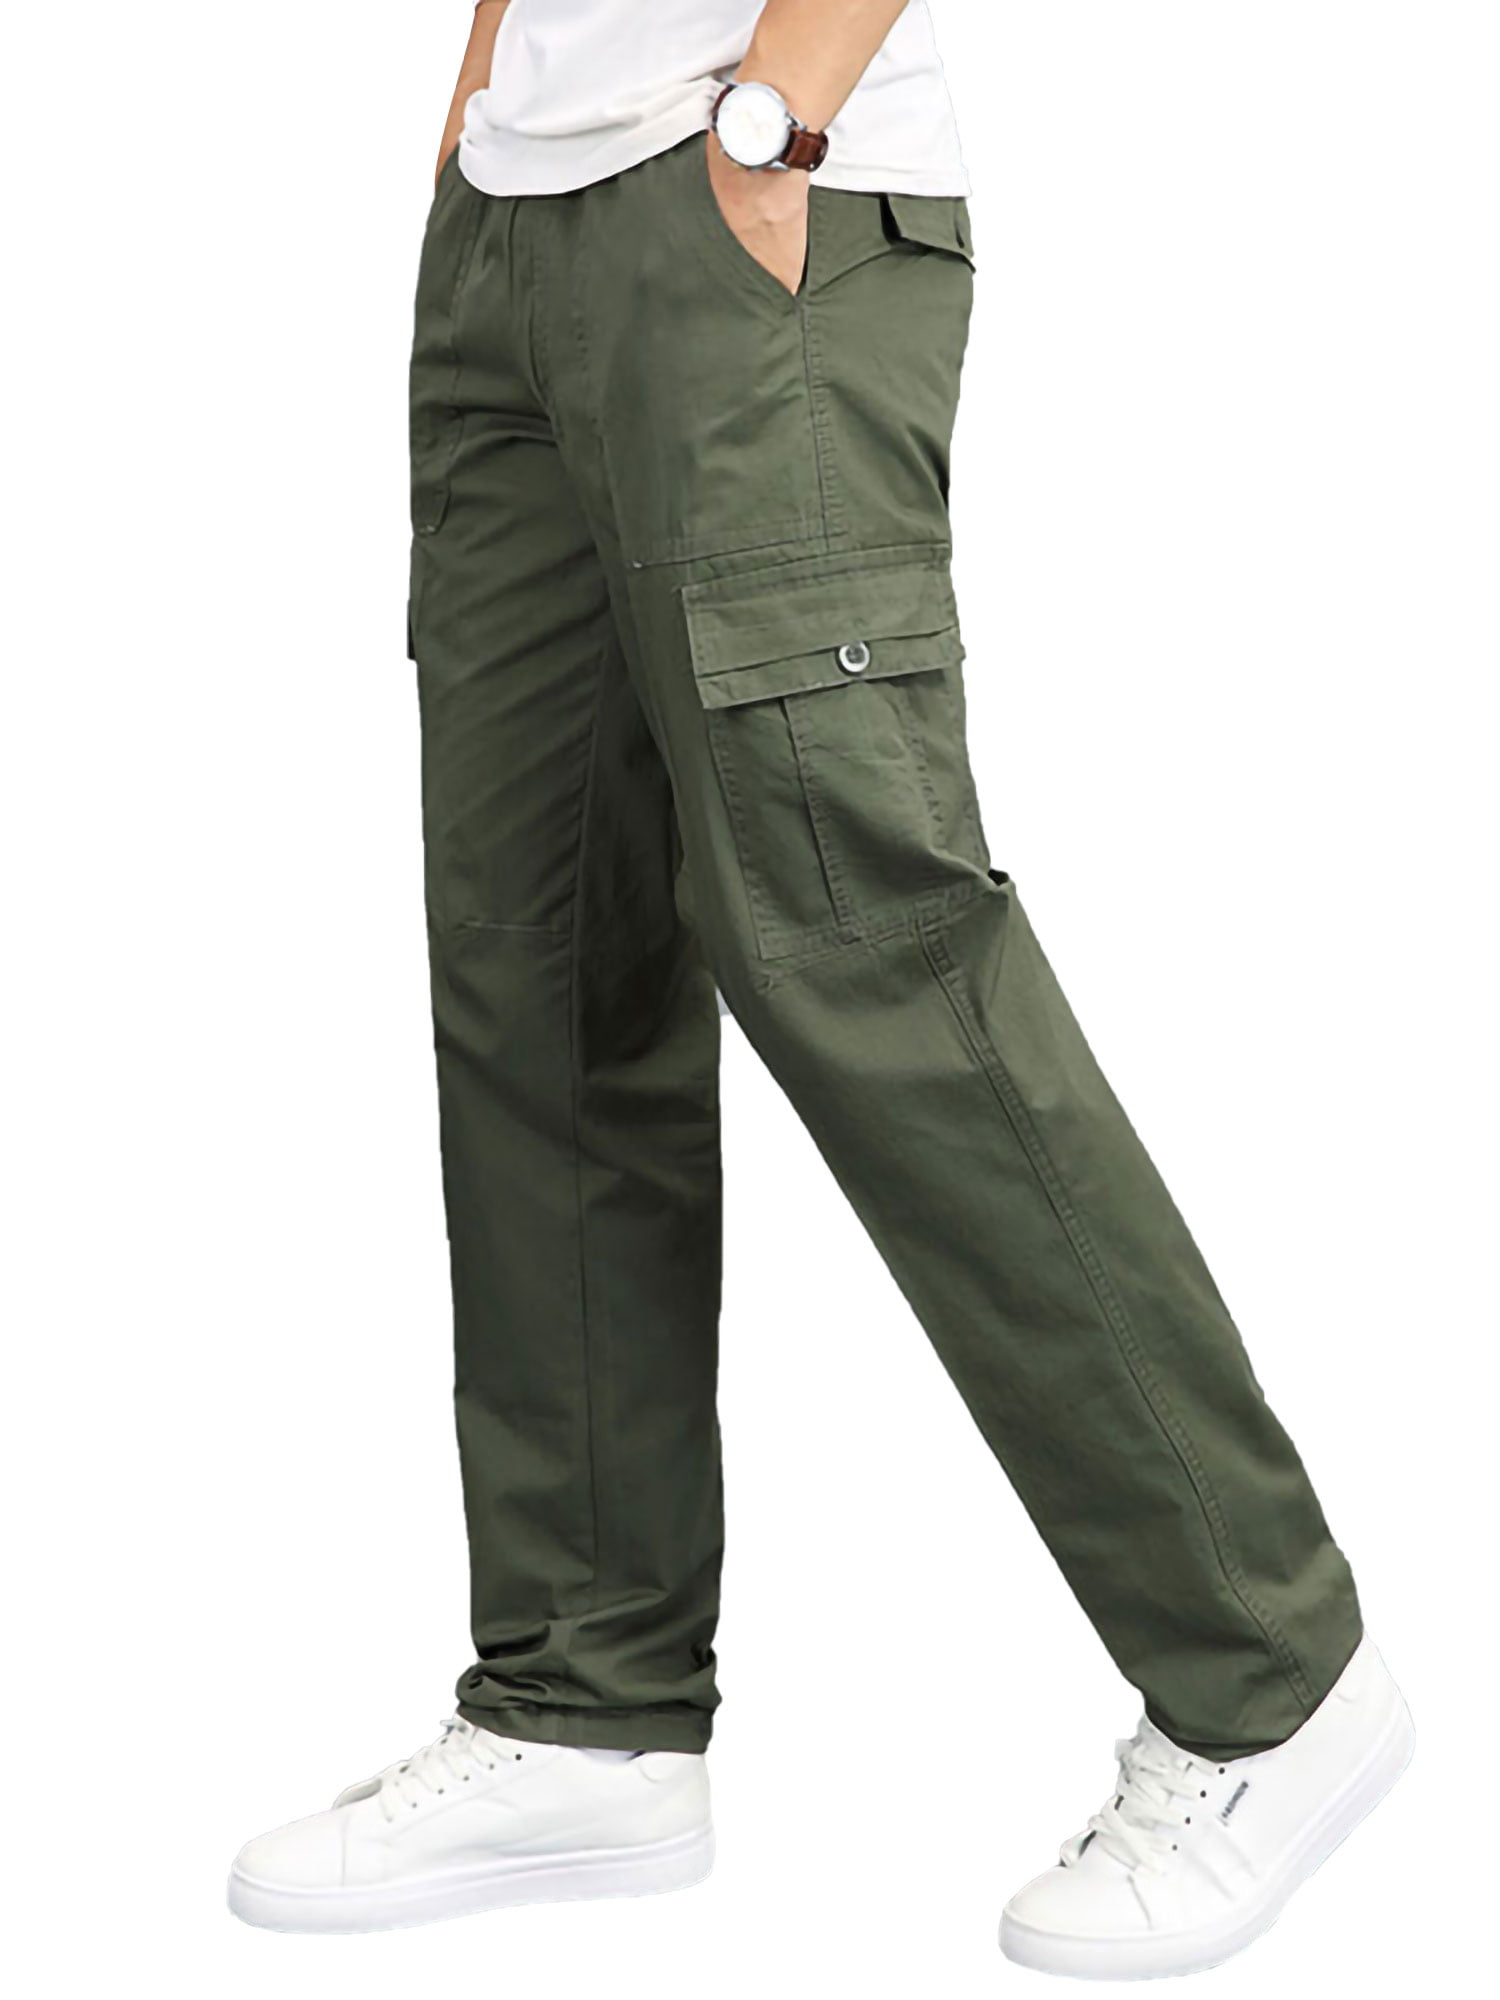 Mens Army Combat Works Trousers Pants Combats Cargo Pockets Heavy Duty Jogger 